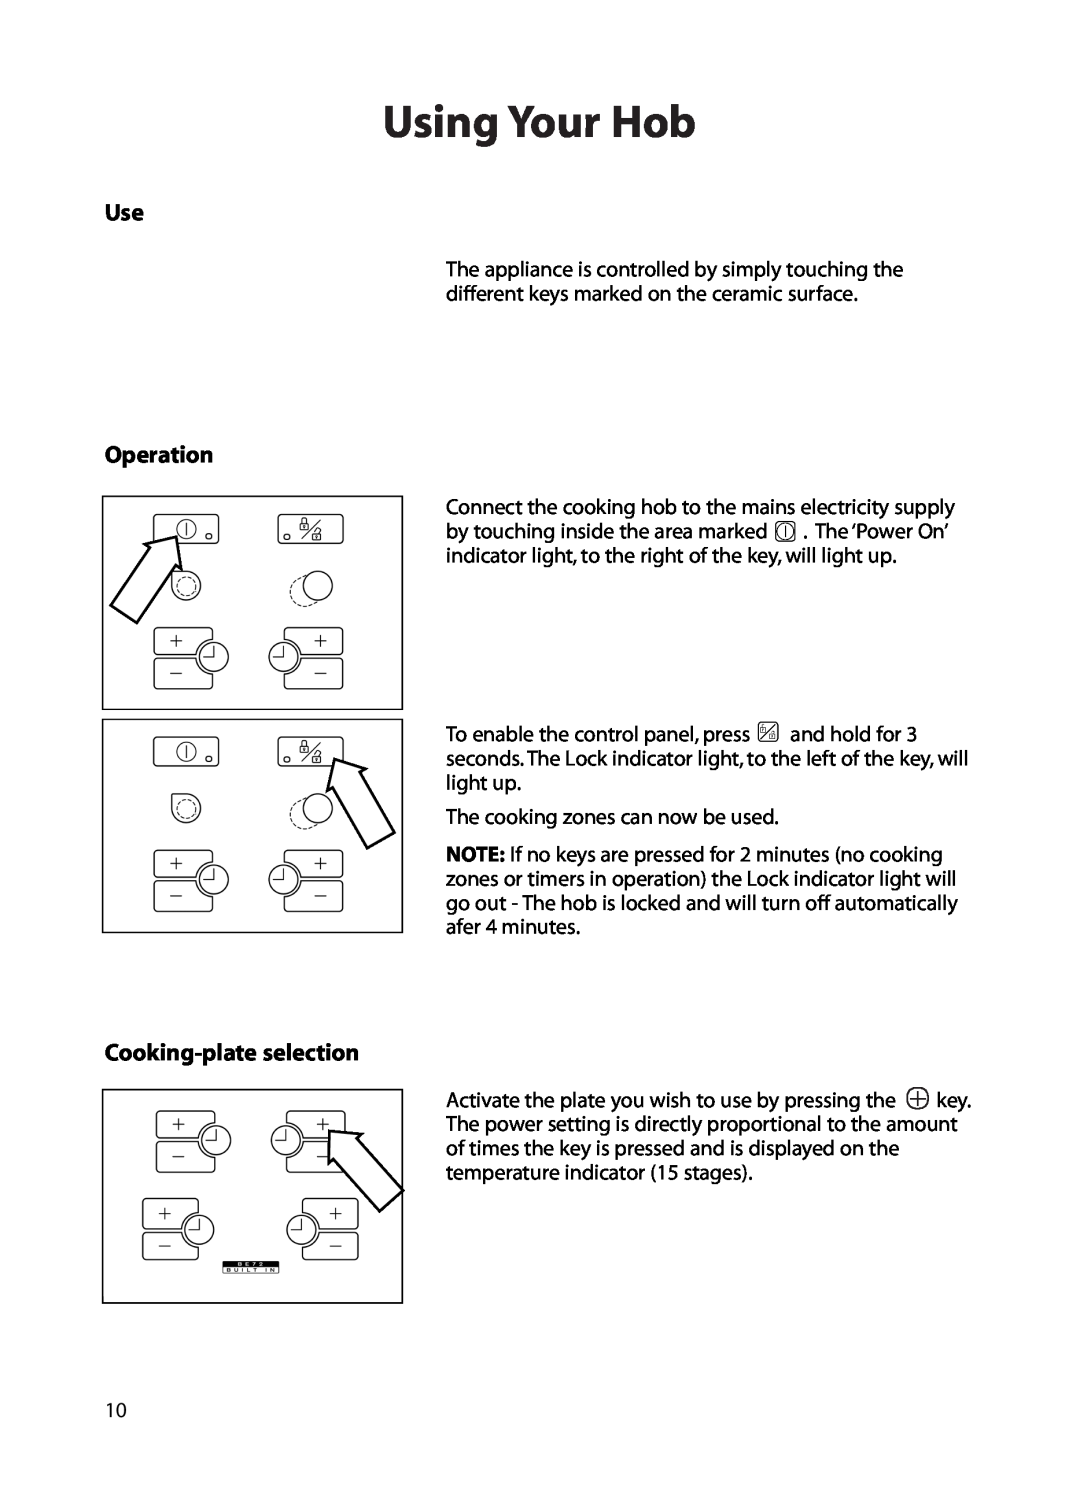 Hotpoint BE72 manual Use Operation Cooking-plate selection, Using Your Hob 